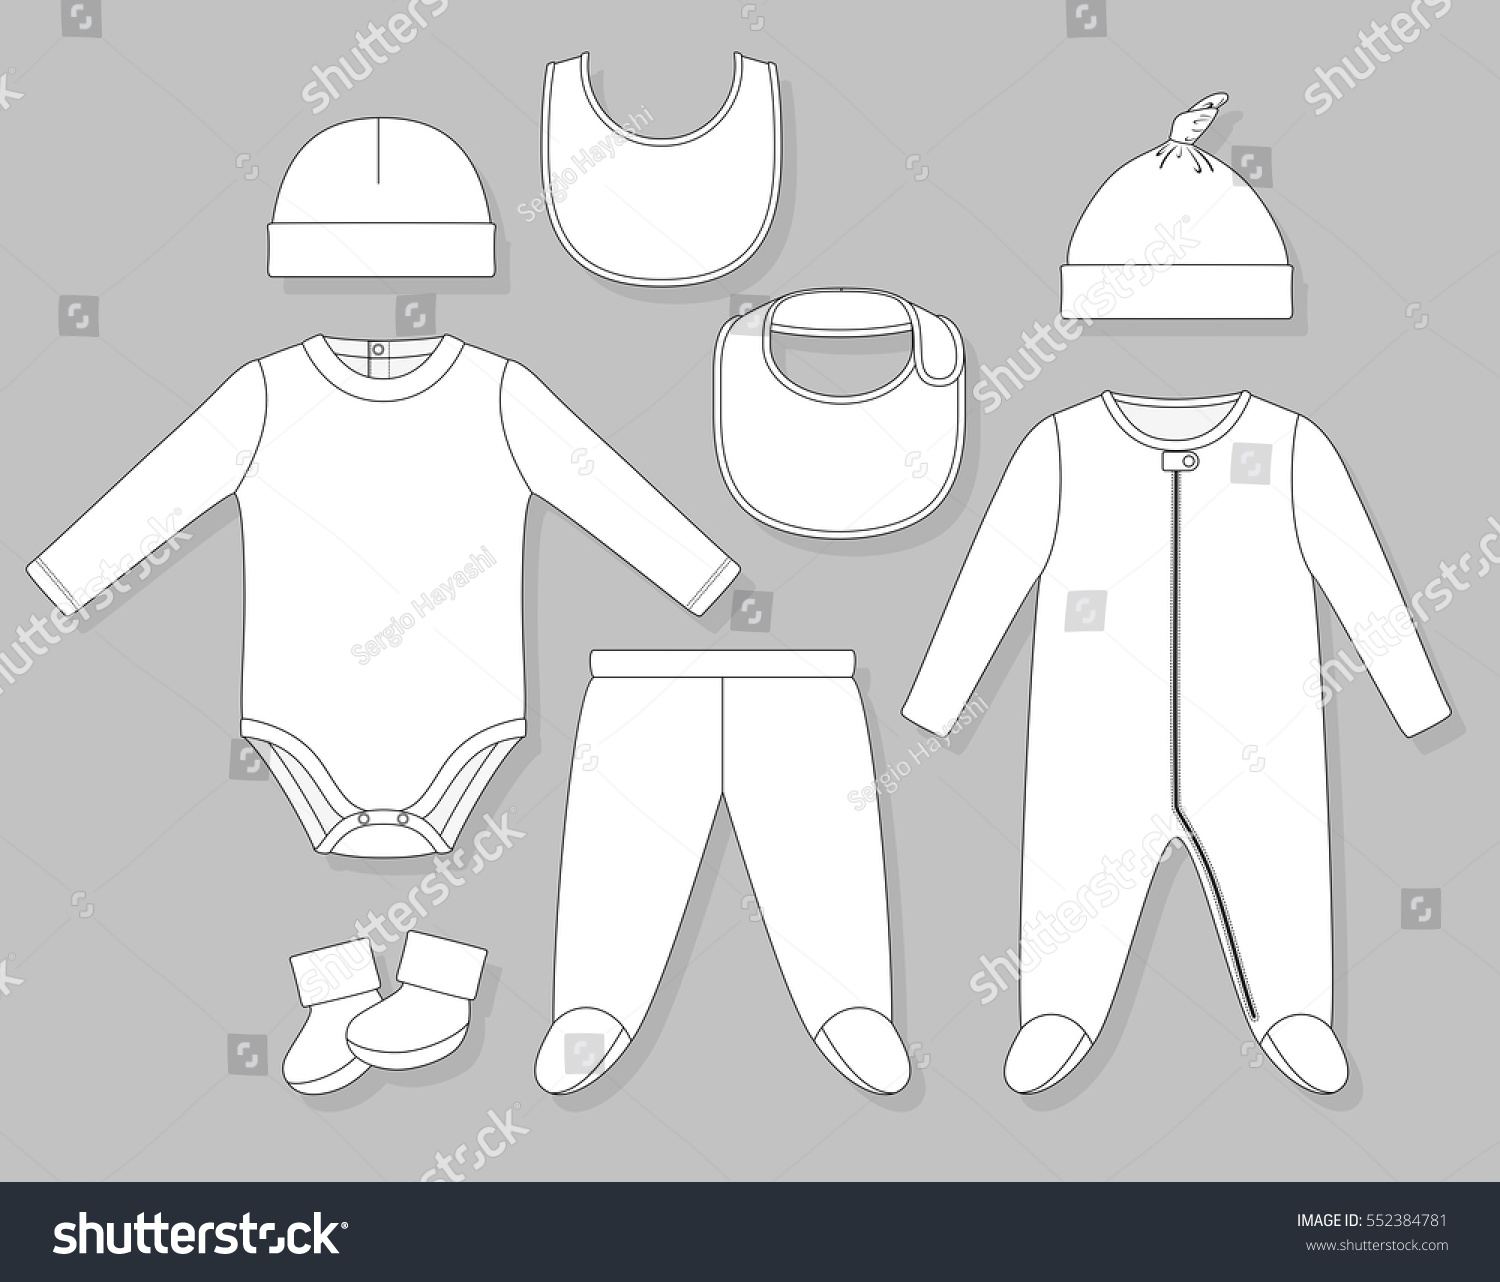 SVG of baby boy clothes set flat sketch isolated on grey background svg